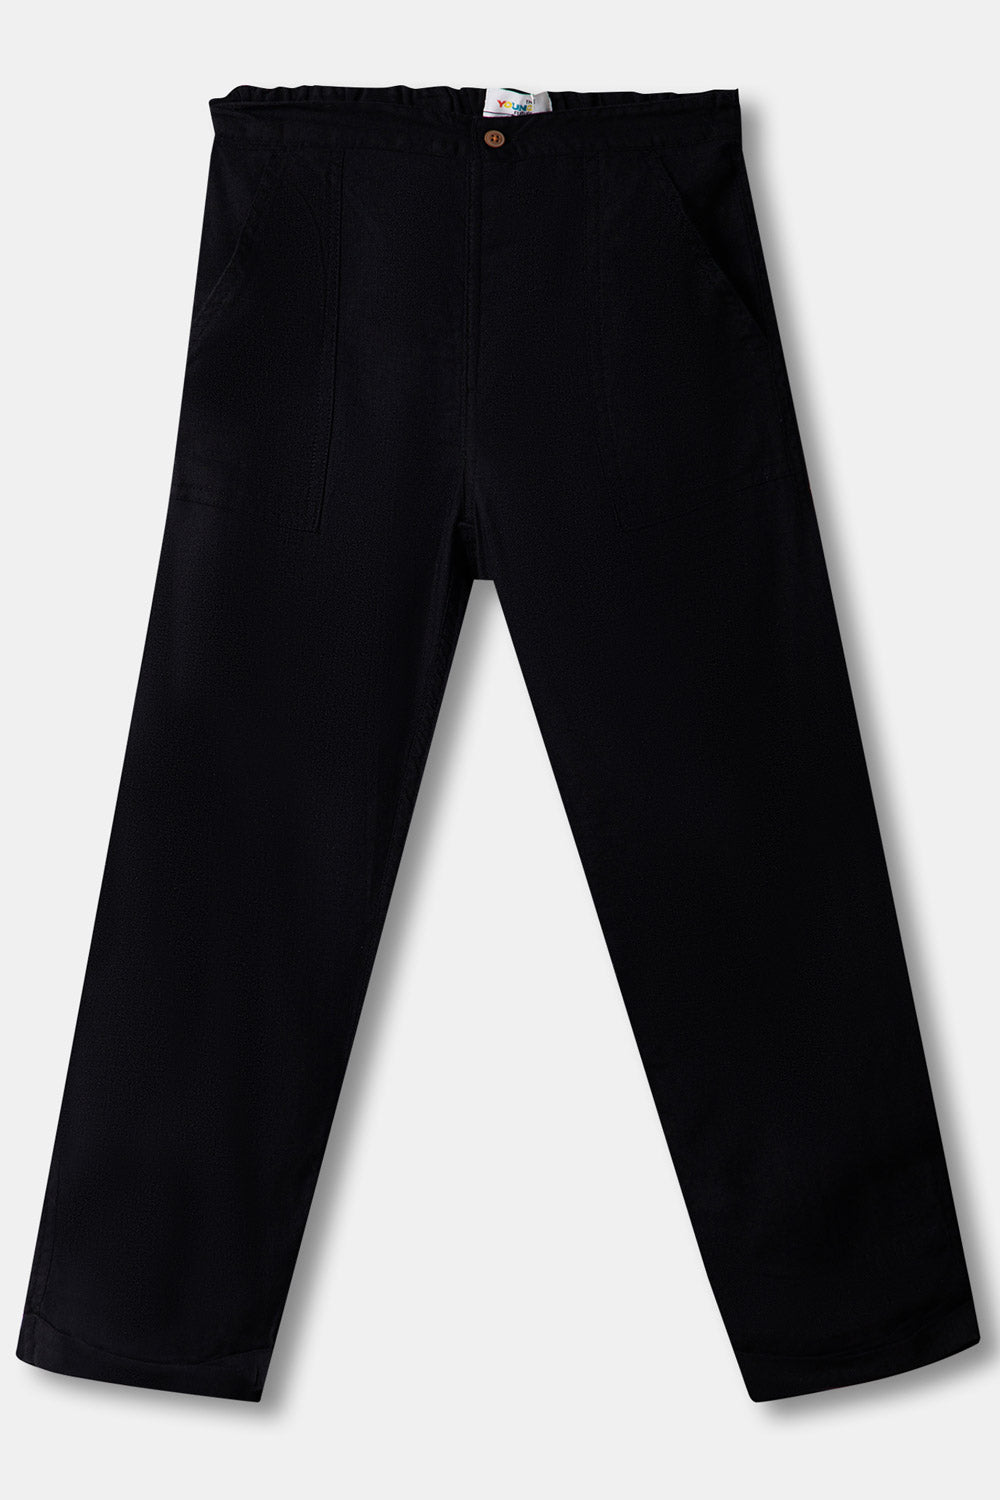 The Young Future  Pants for Boys  - Black  - BT01